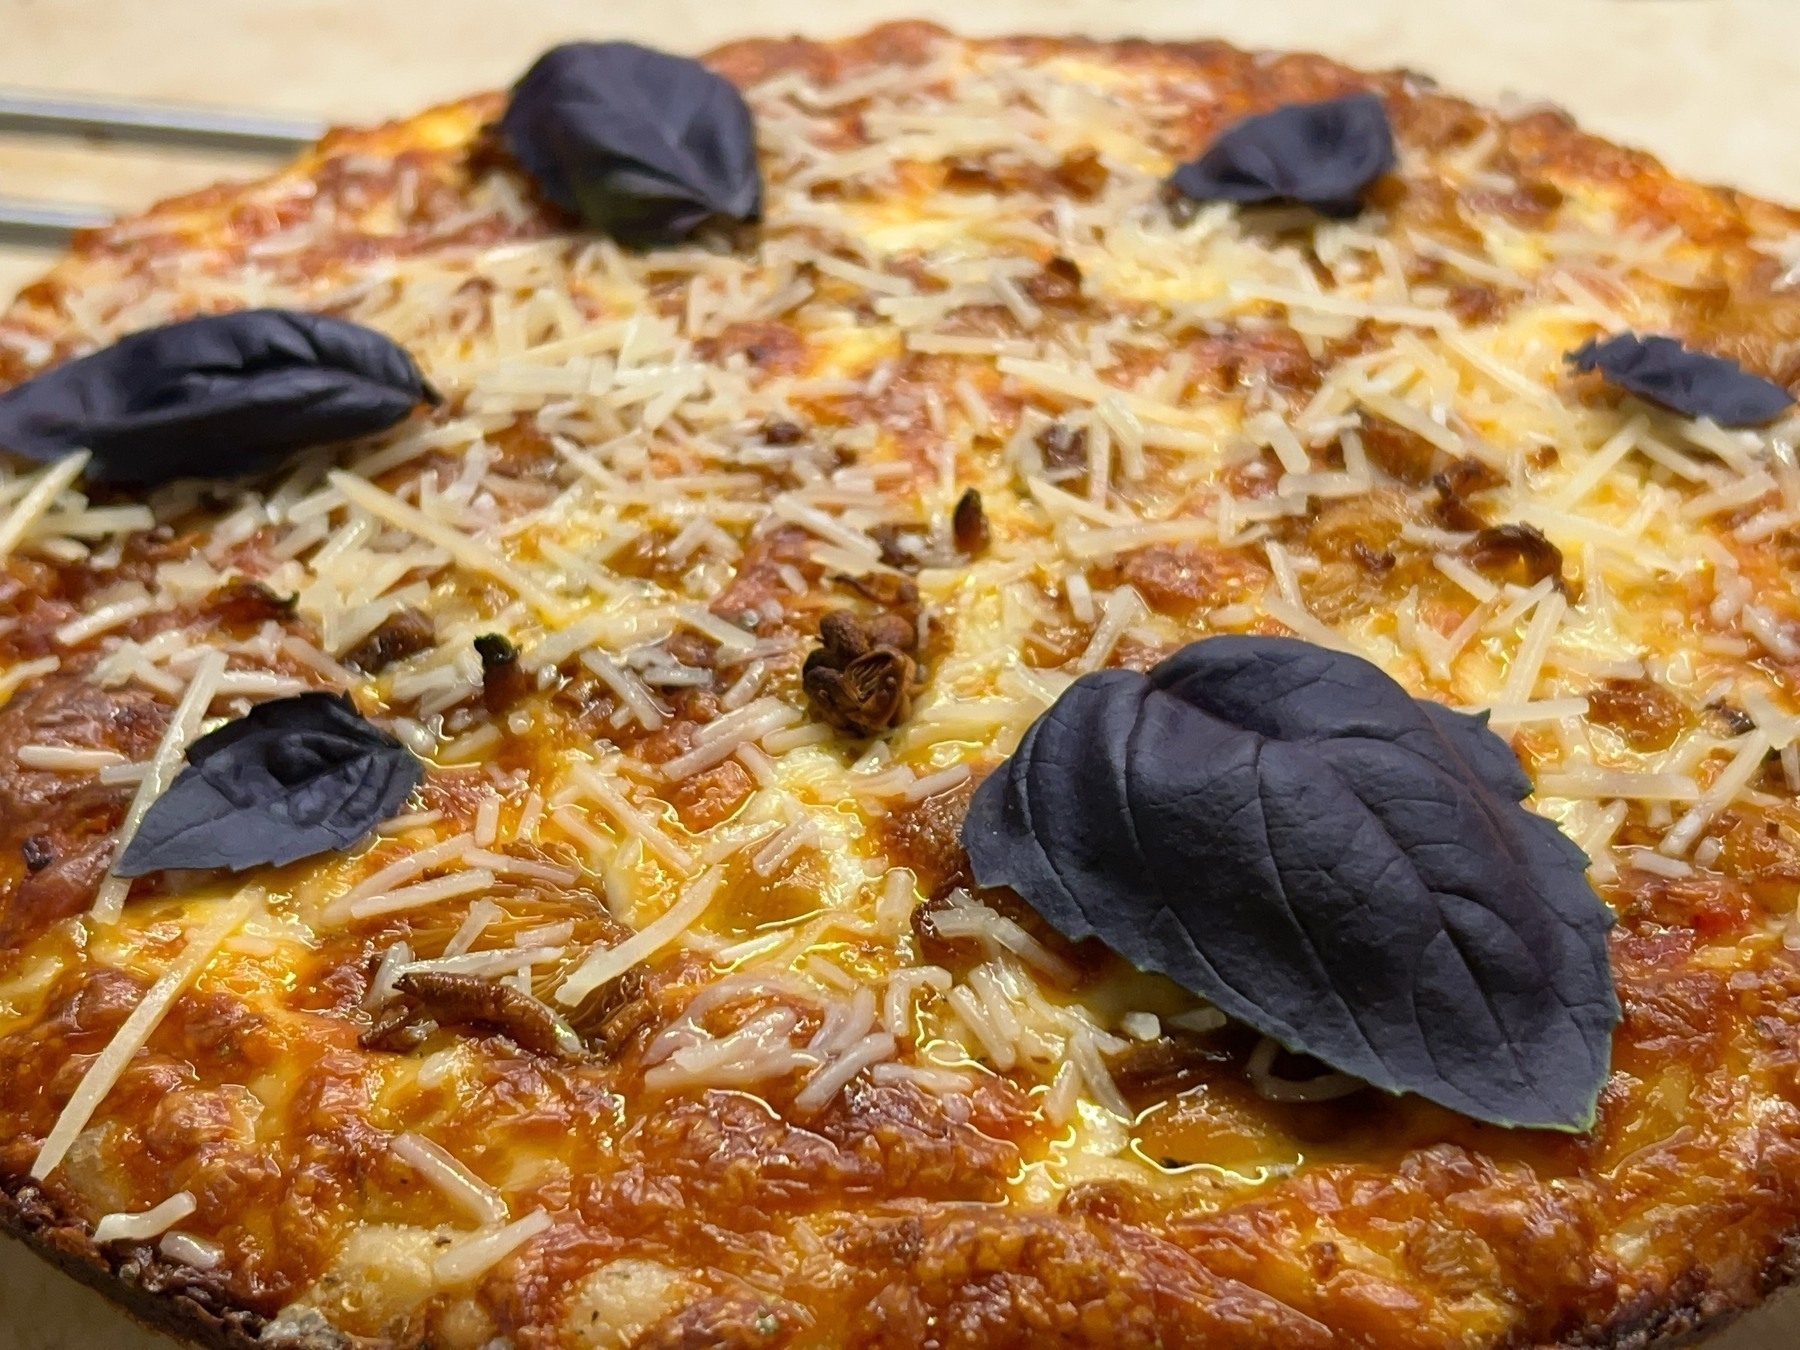 Pizza with cheese and red basil leaves on top.